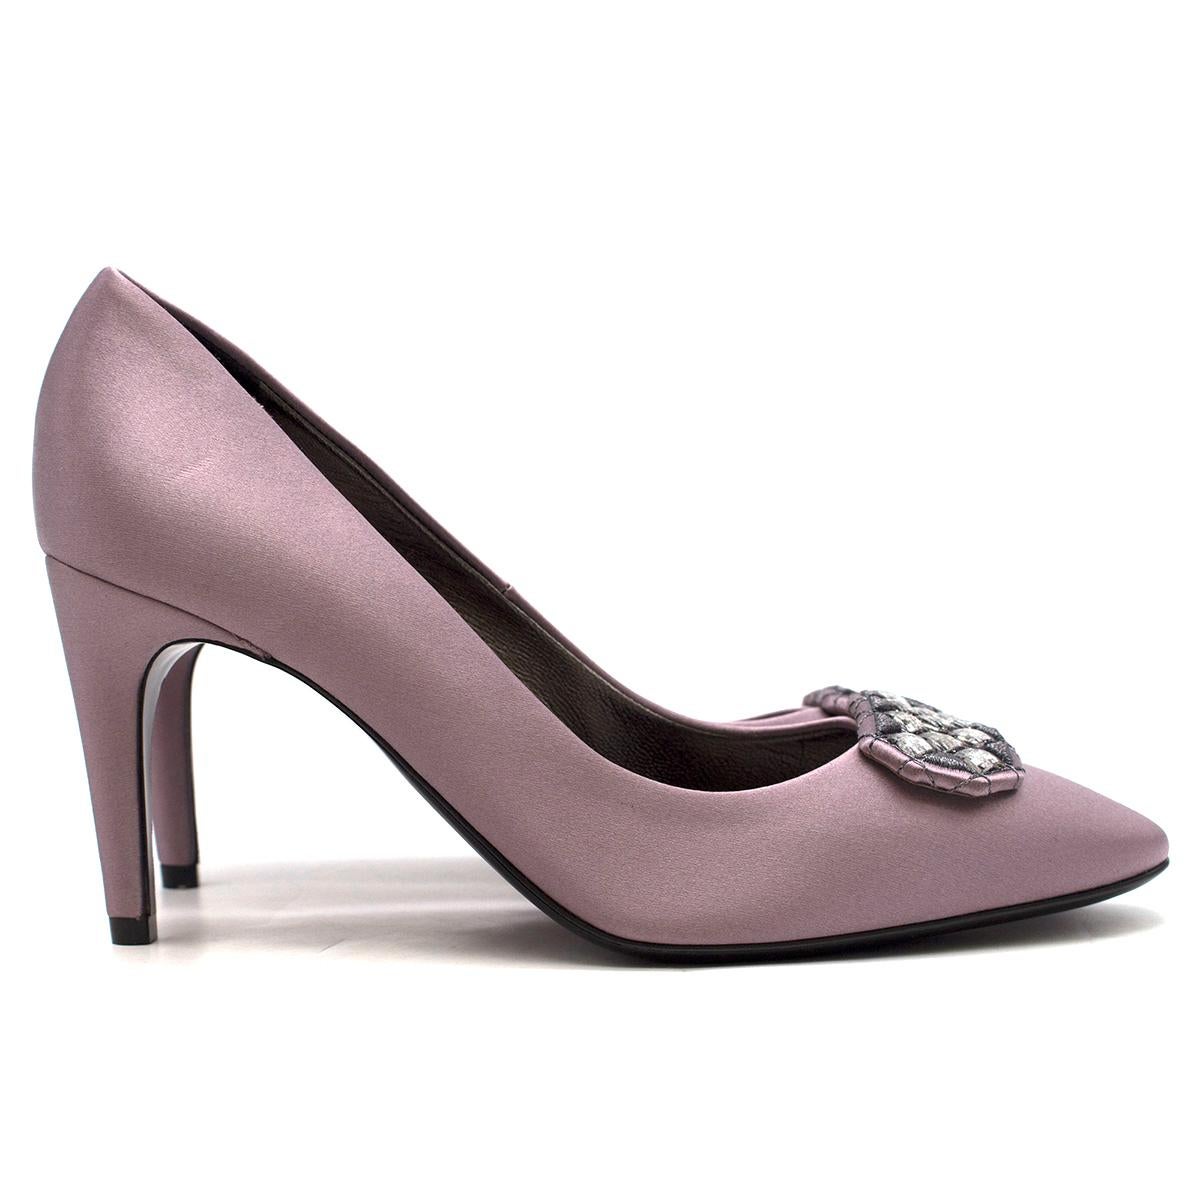 Bottega Veneta Silk Purple Crystal Embellished Pumps

- Silk purple pumps
- Stiletto heel
- Crystal embellishment to the front
- Almond toe
- Silver tone leather insole 
- Black leather sole

This item comes with the original dust bags.

Please